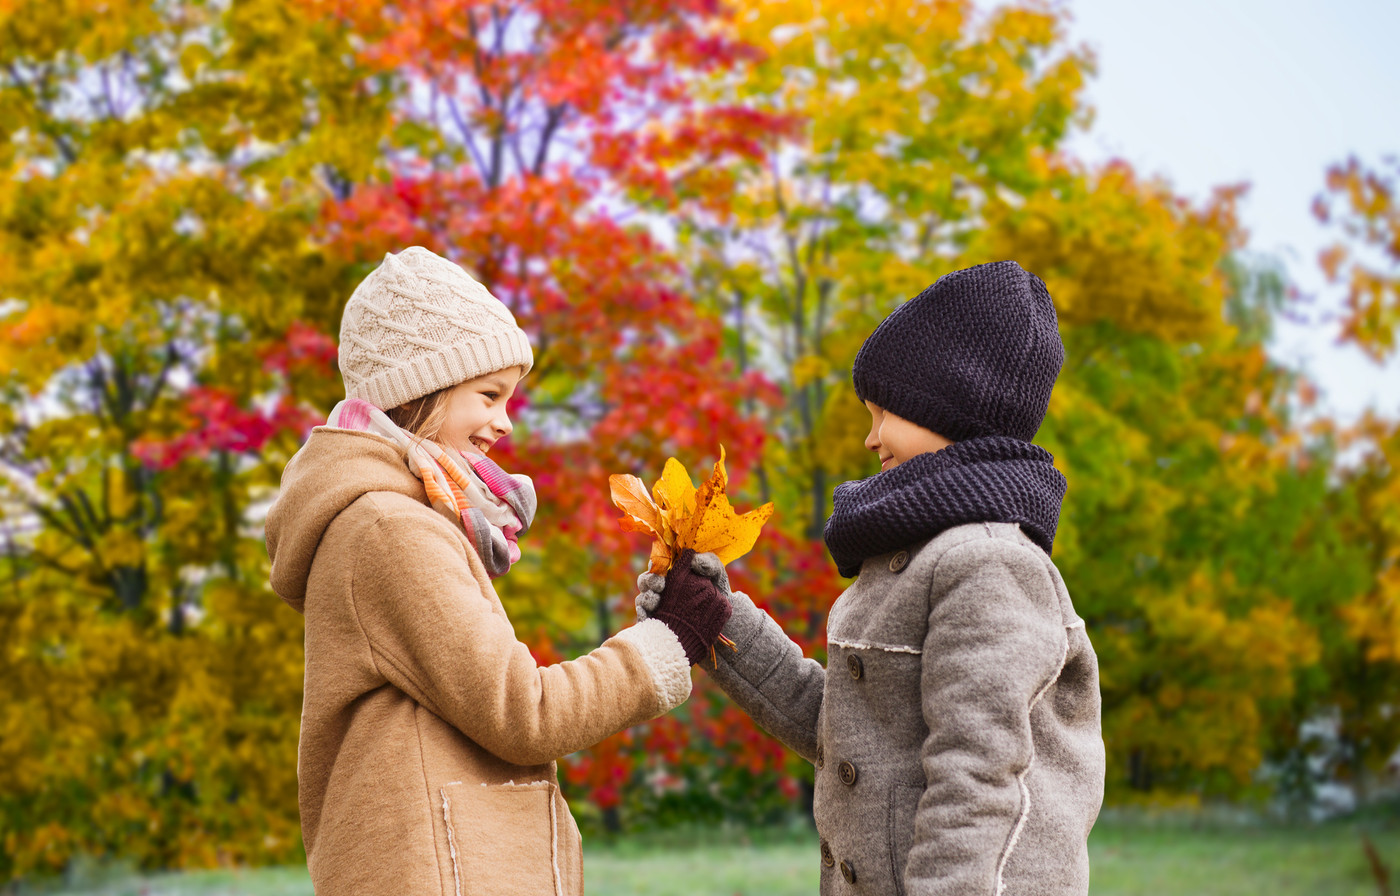 kids with autumn maple leaves over park background